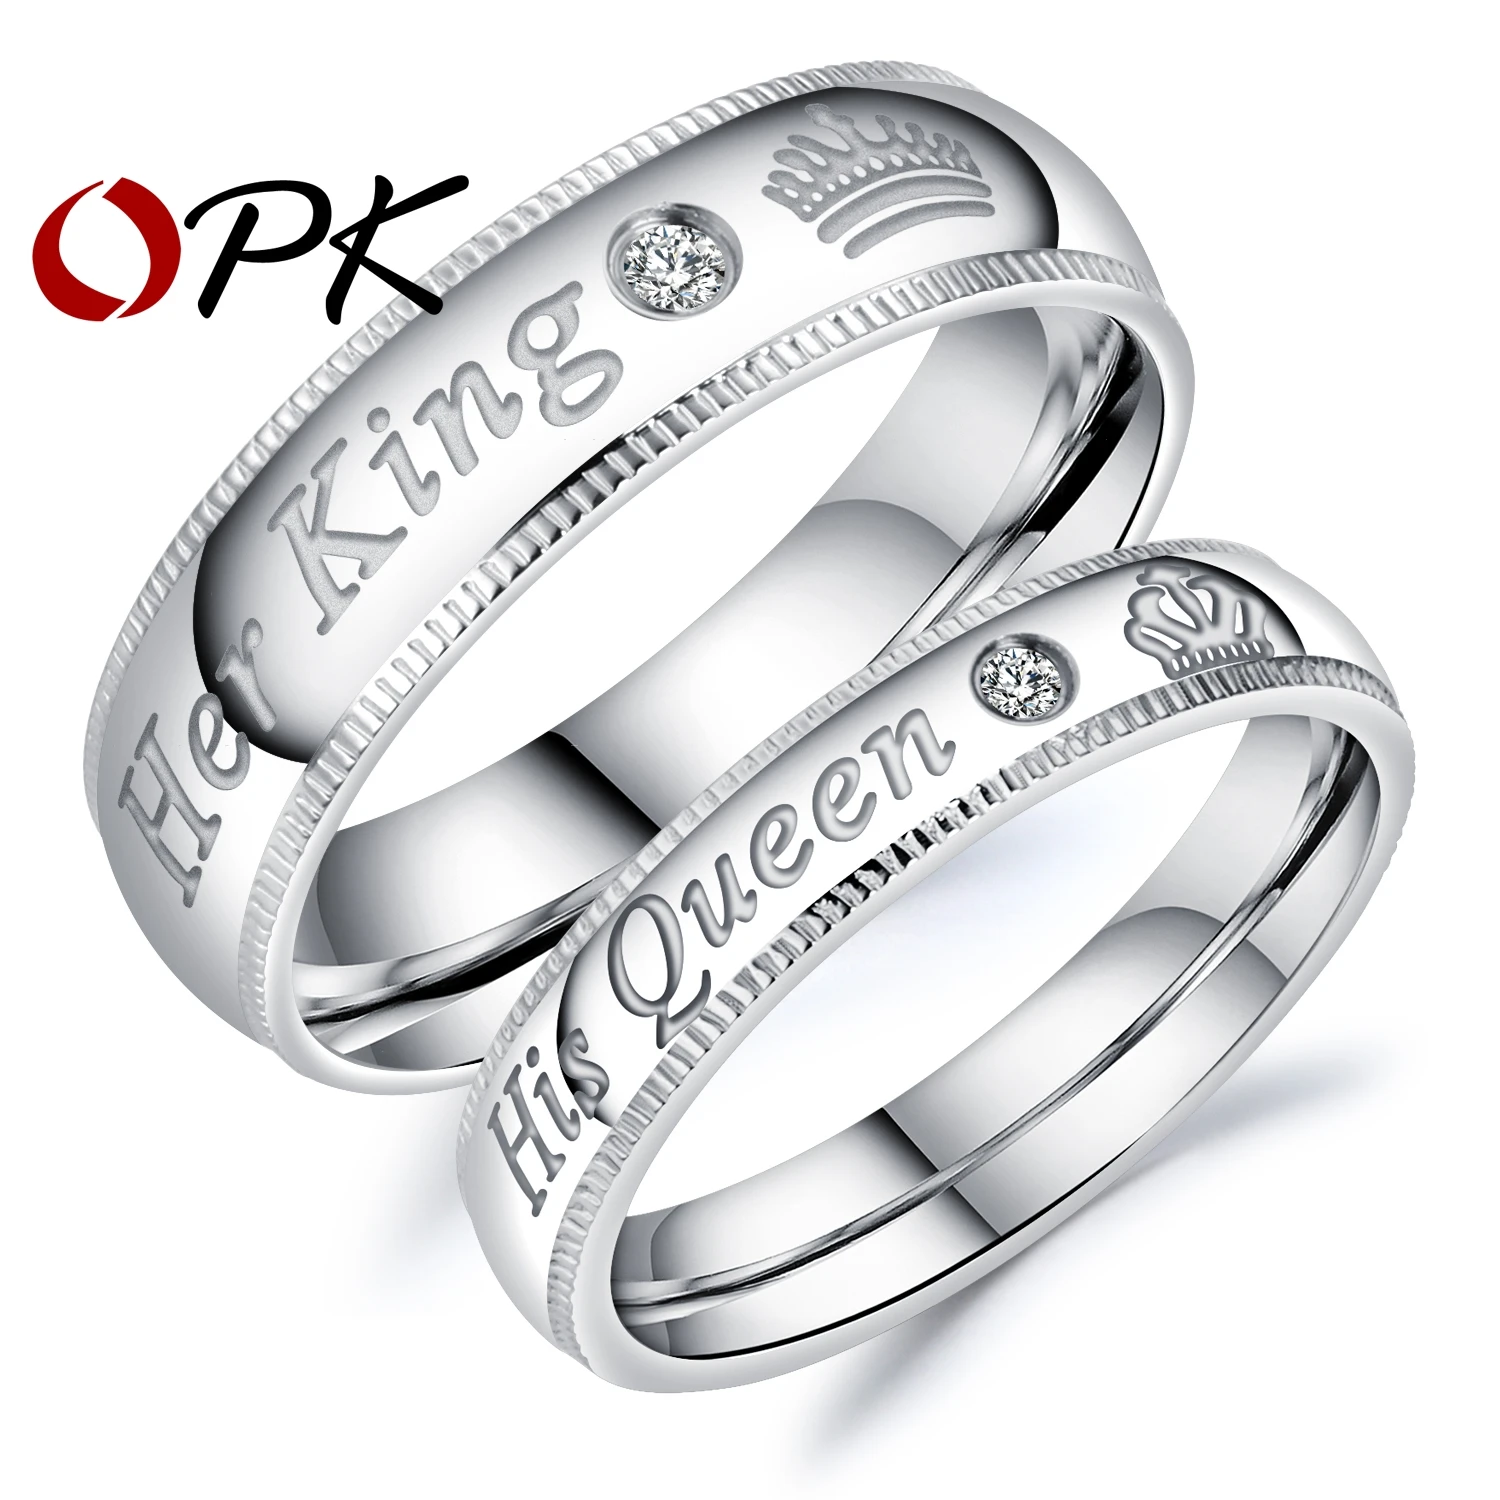 

OPK 2017 New Arrival Romantic Couple Rings "Her King His Queen" Stainless Steel Engraving Ring For Lover Best Jewelry Gift GJ607